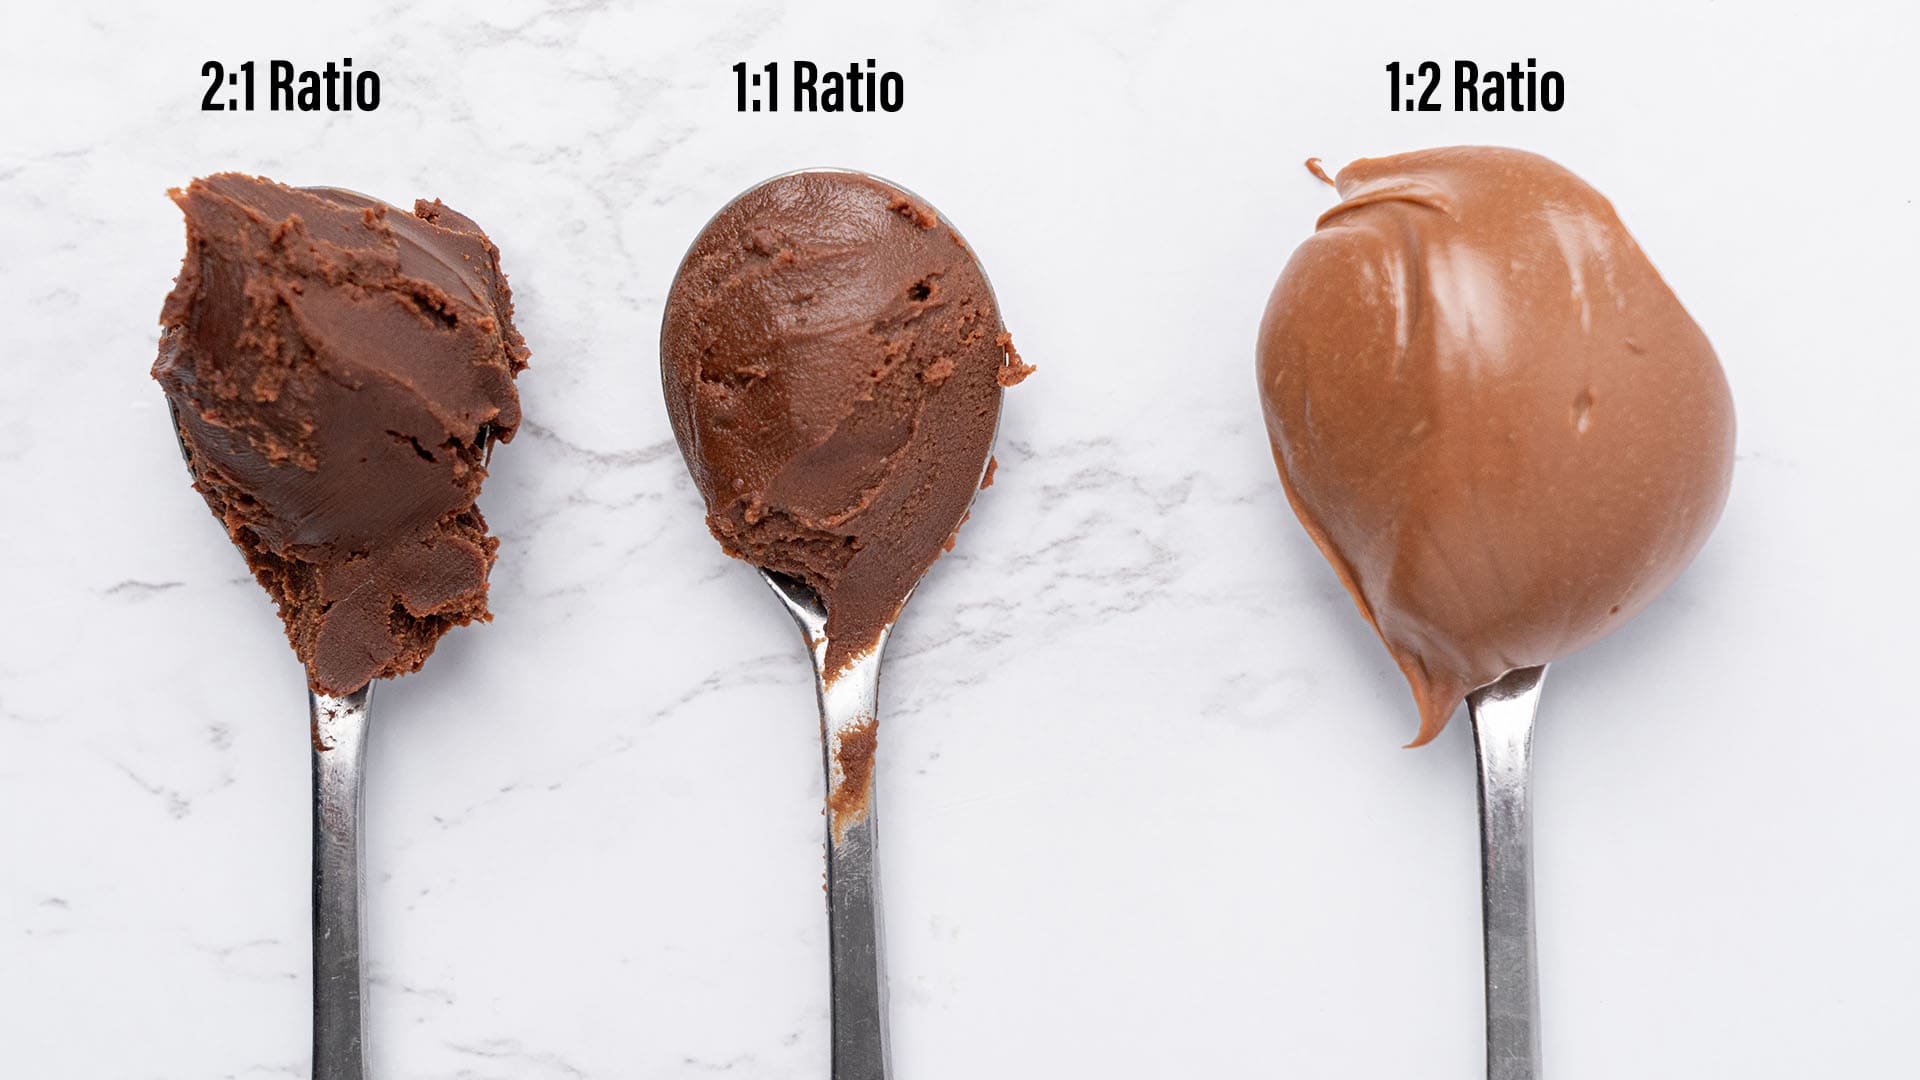 3 spoons with different chocolate ganache ratios.